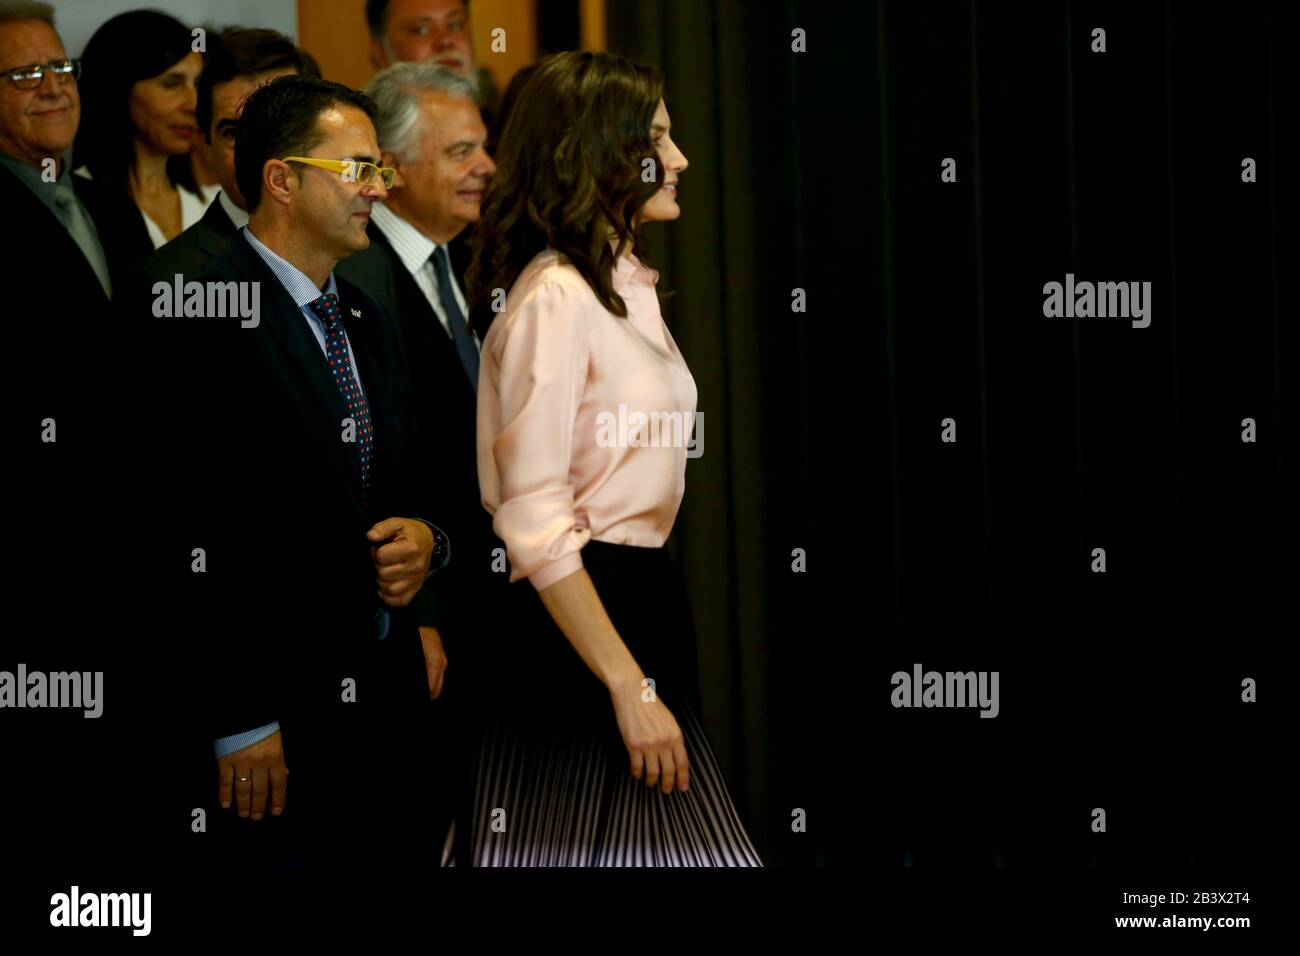 Madris, spain, 05/03/2020.- Queen of Spain Letizia, together with the Minister of Health, Salvador Illa, presides over the central act of World Rare Disease Day, which is celebrated with the motto "Grow with you, our hope". In the city of BBVA in Madrid with the assistance of the president of the Congress, Meritxell Batet; the Spanish Federation of Rare Diseases (Feder in Spanish), Juan Carrión, and that of BBVA, Carlos Torres.On Feder's 20th anniversary, the queen wanted to recognize the work of the 368 associations that make up the federation for her "tireless" task to raise funds with which Stock Photo